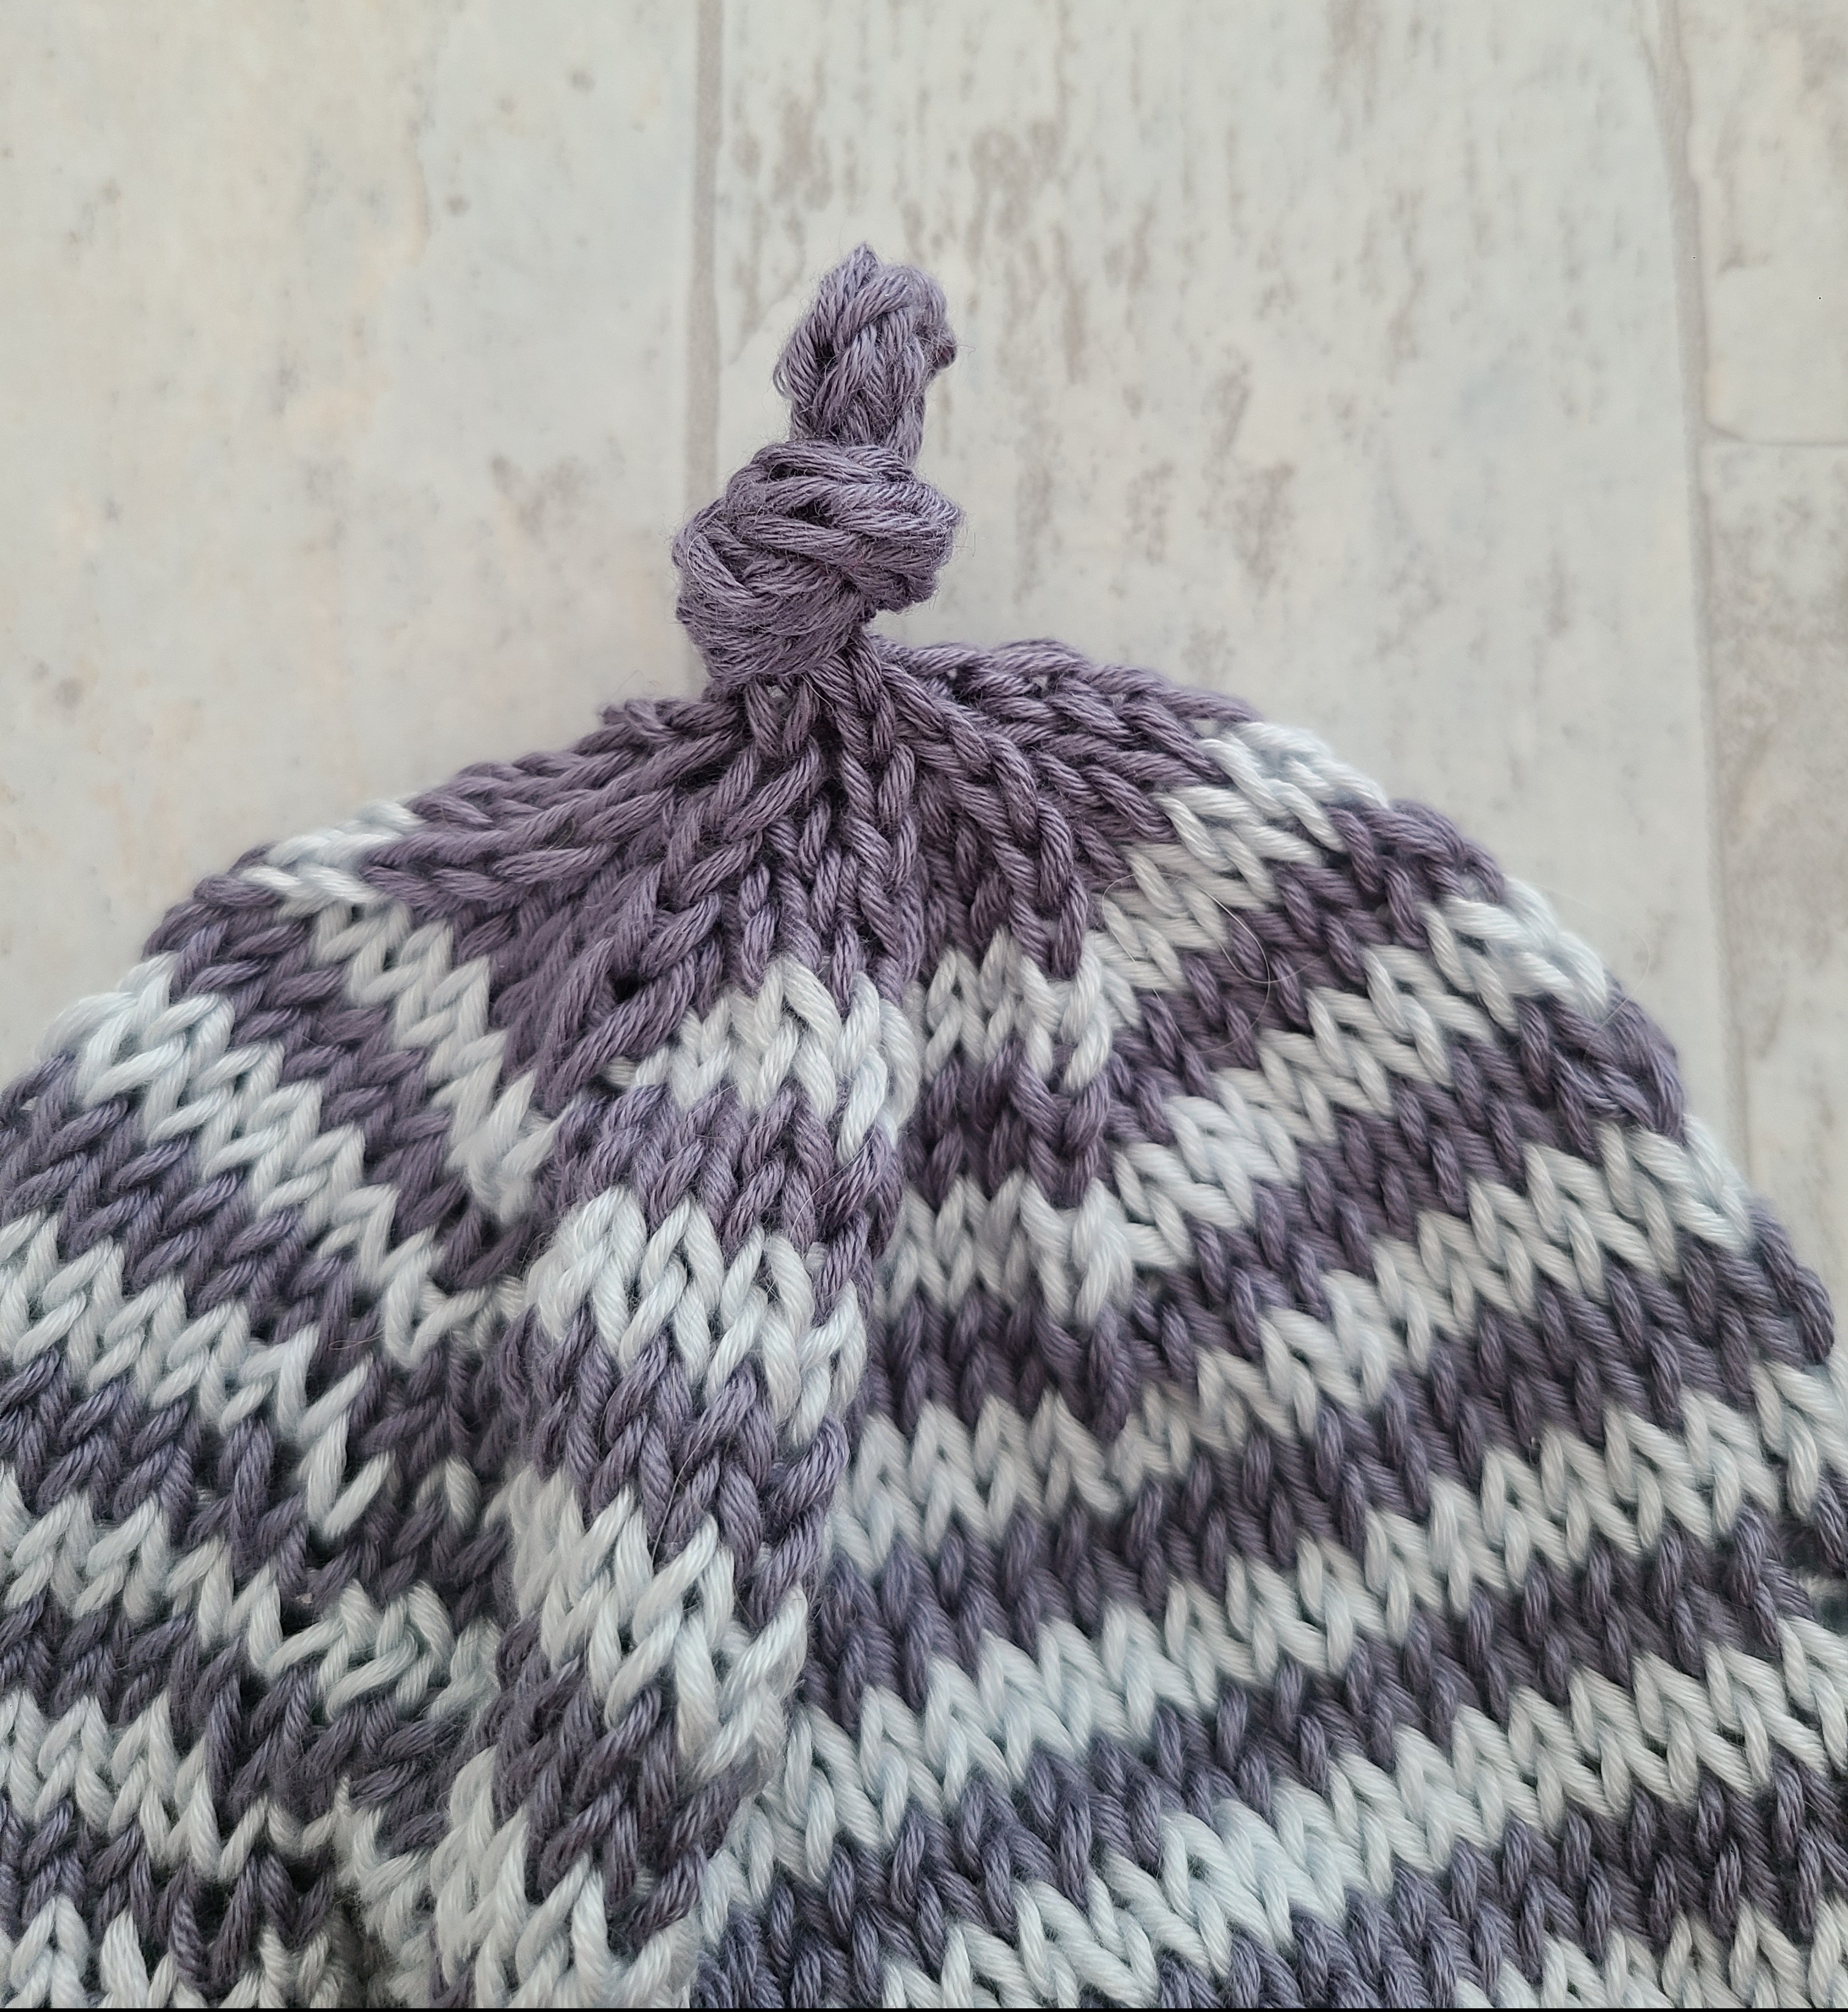 Knitting An I-Cord On A Hat